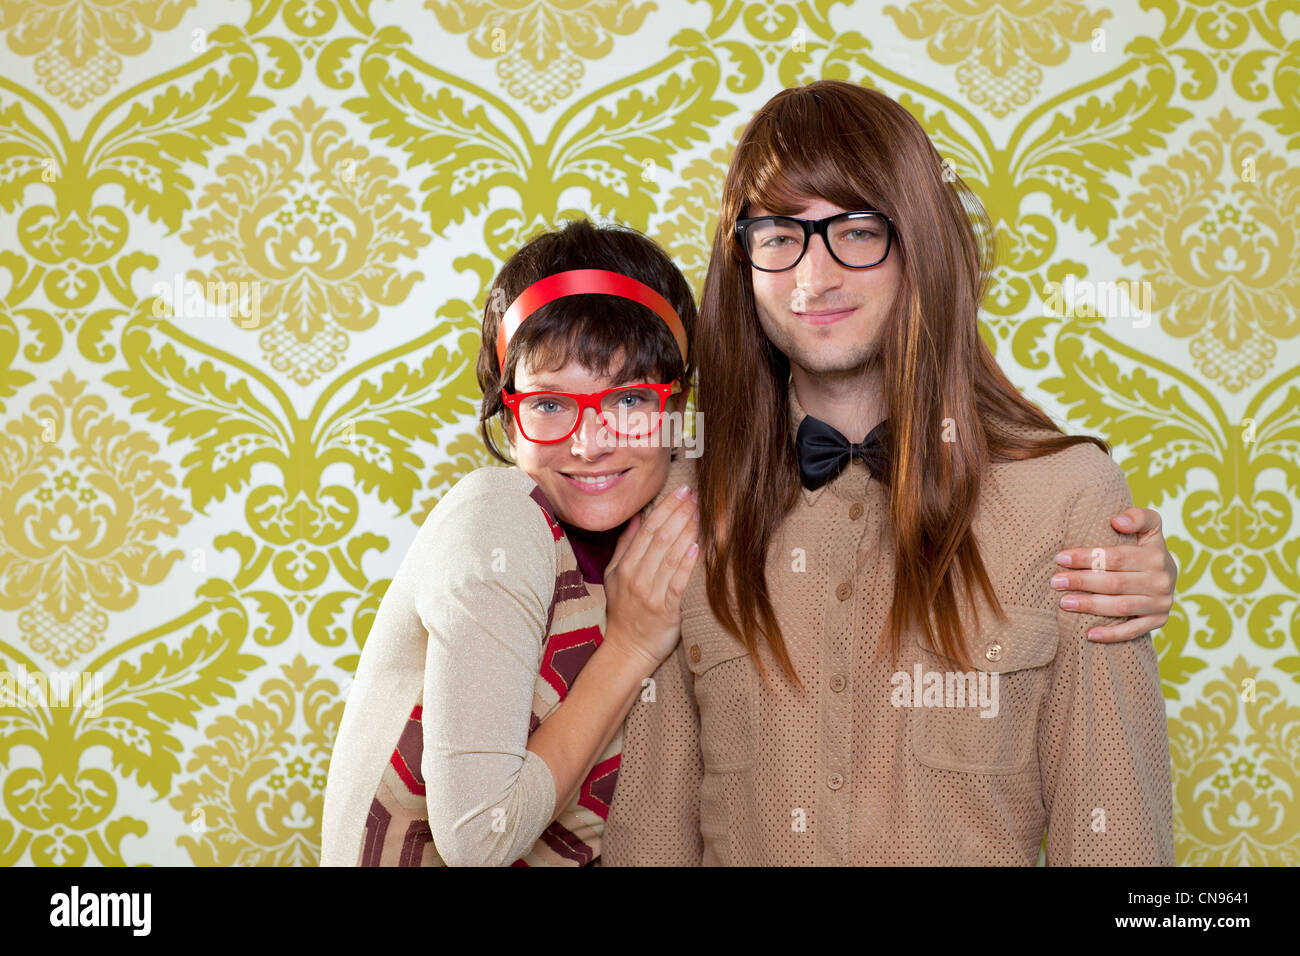 Funny humor silly nerd couple on retro vintage wallpaper background Stock Photo